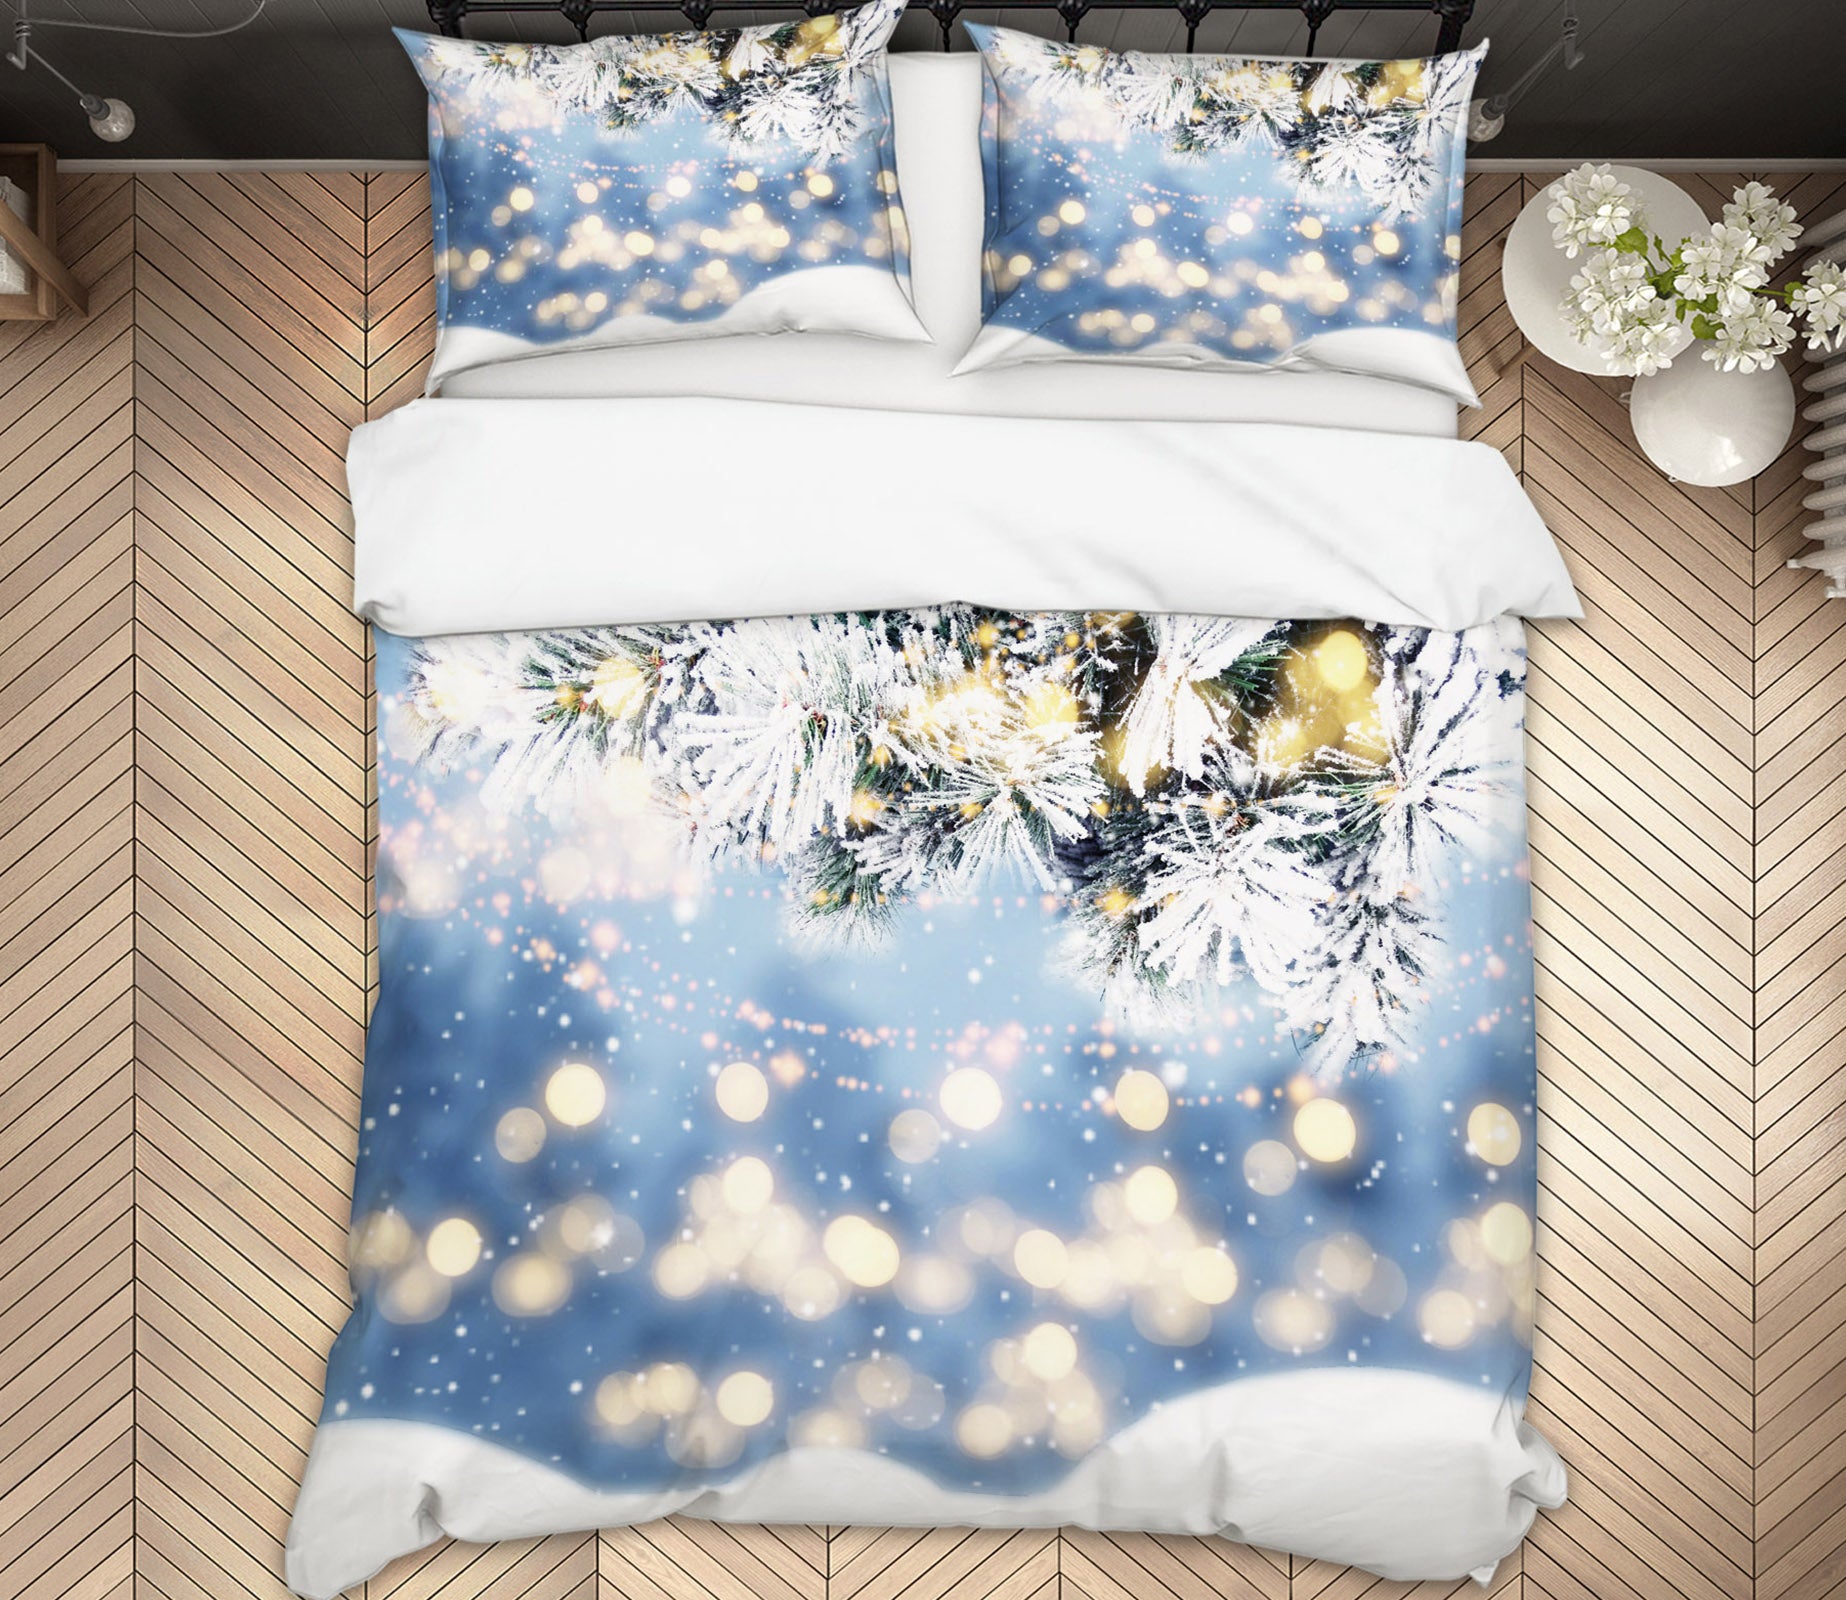 3D Branches Snow 51151 Christmas Quilt Duvet Cover Xmas Bed Pillowcases